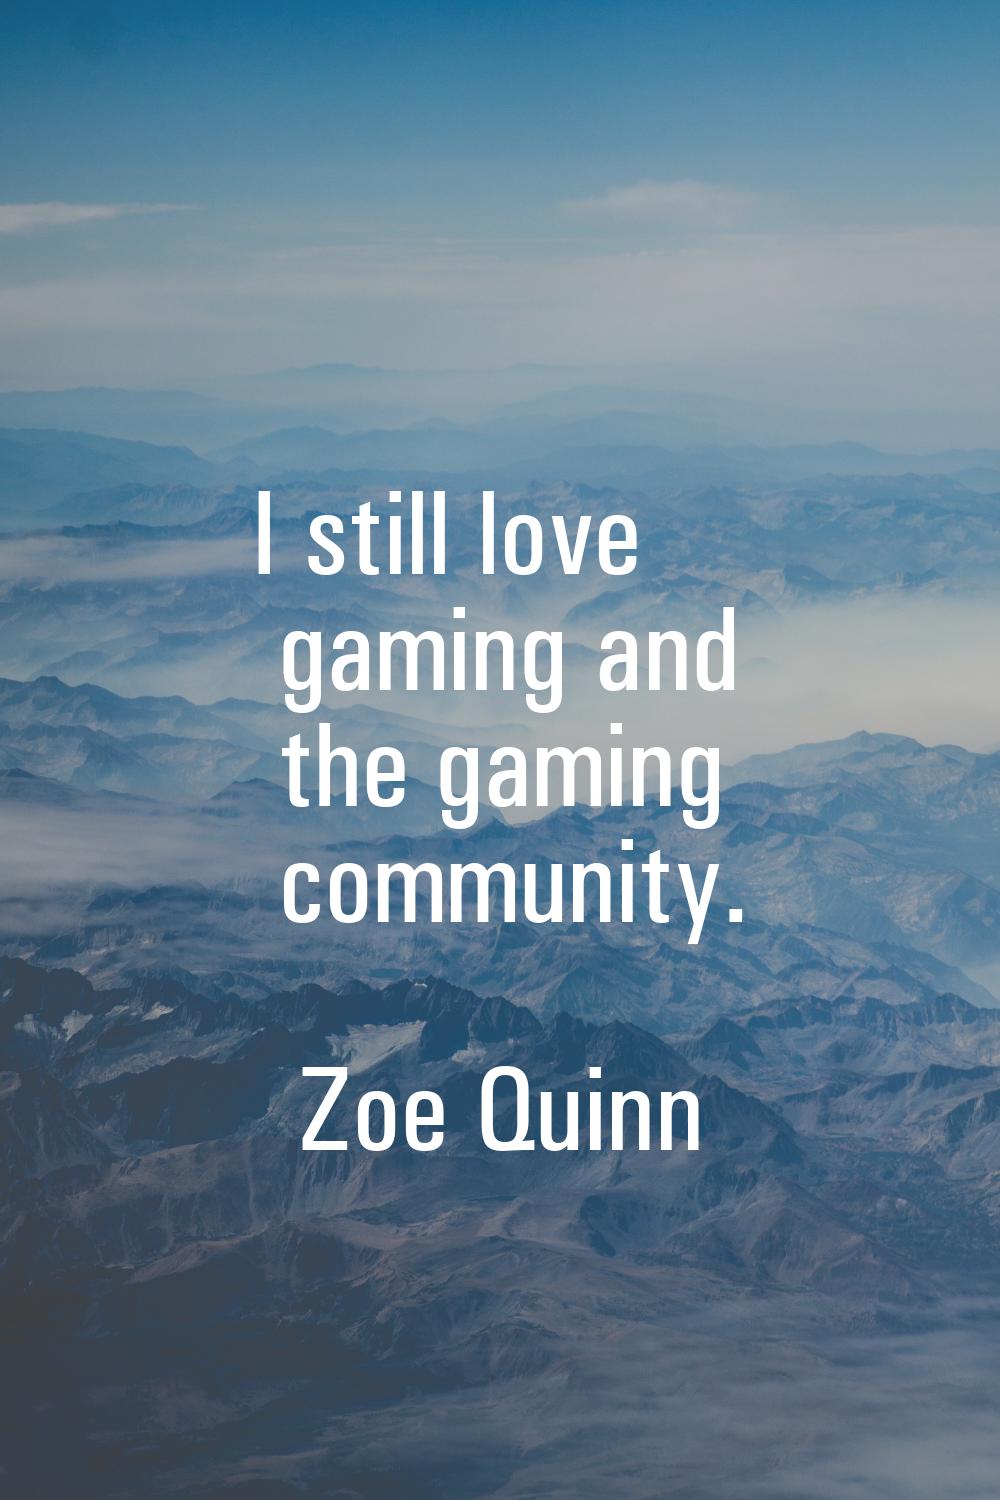 I still love gaming and the gaming community.